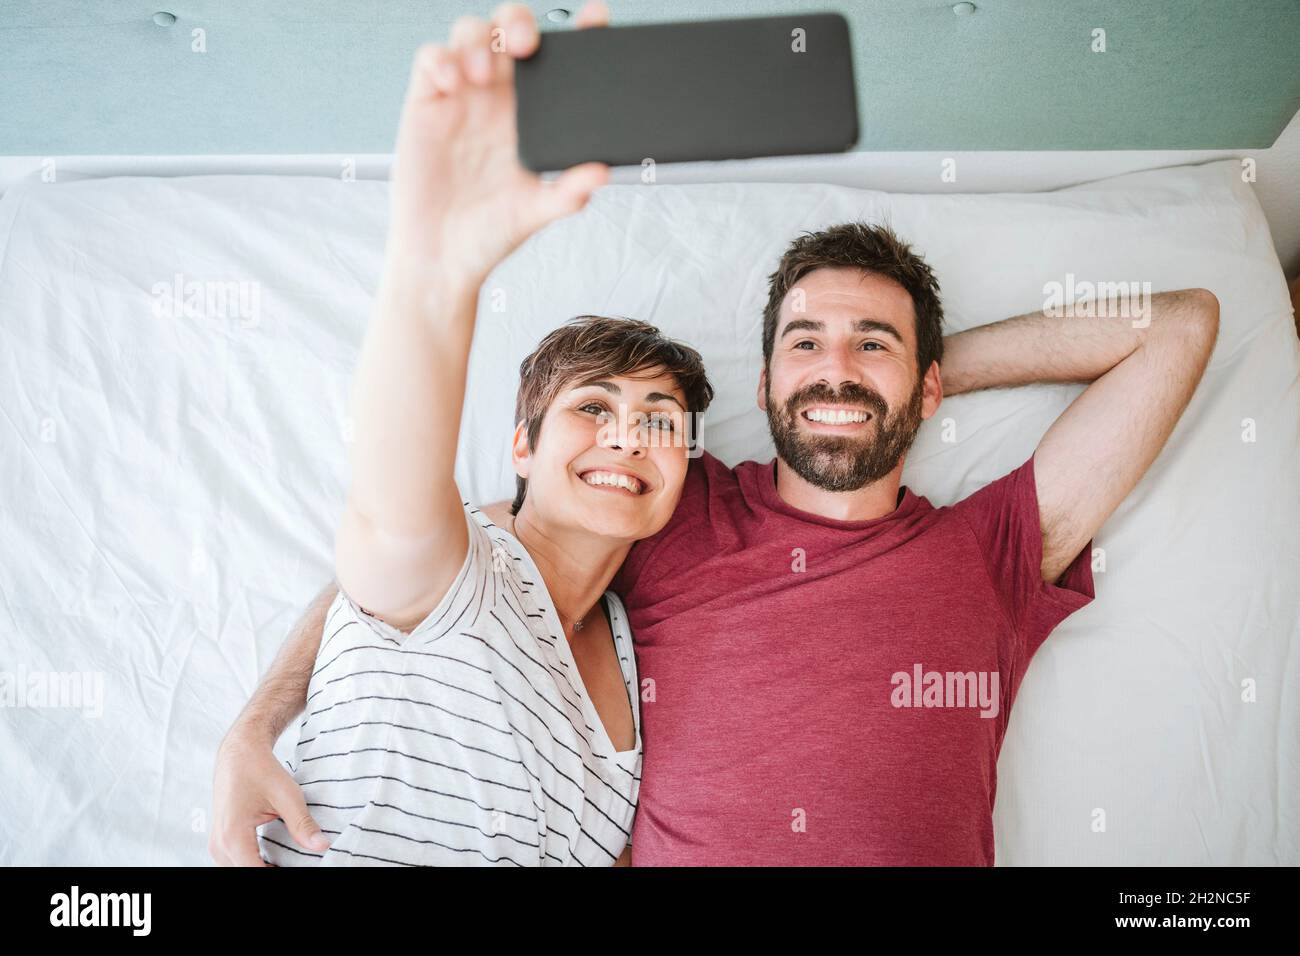 Woman taking selfie with man through smart phone while lying on bed at home Stock Photo